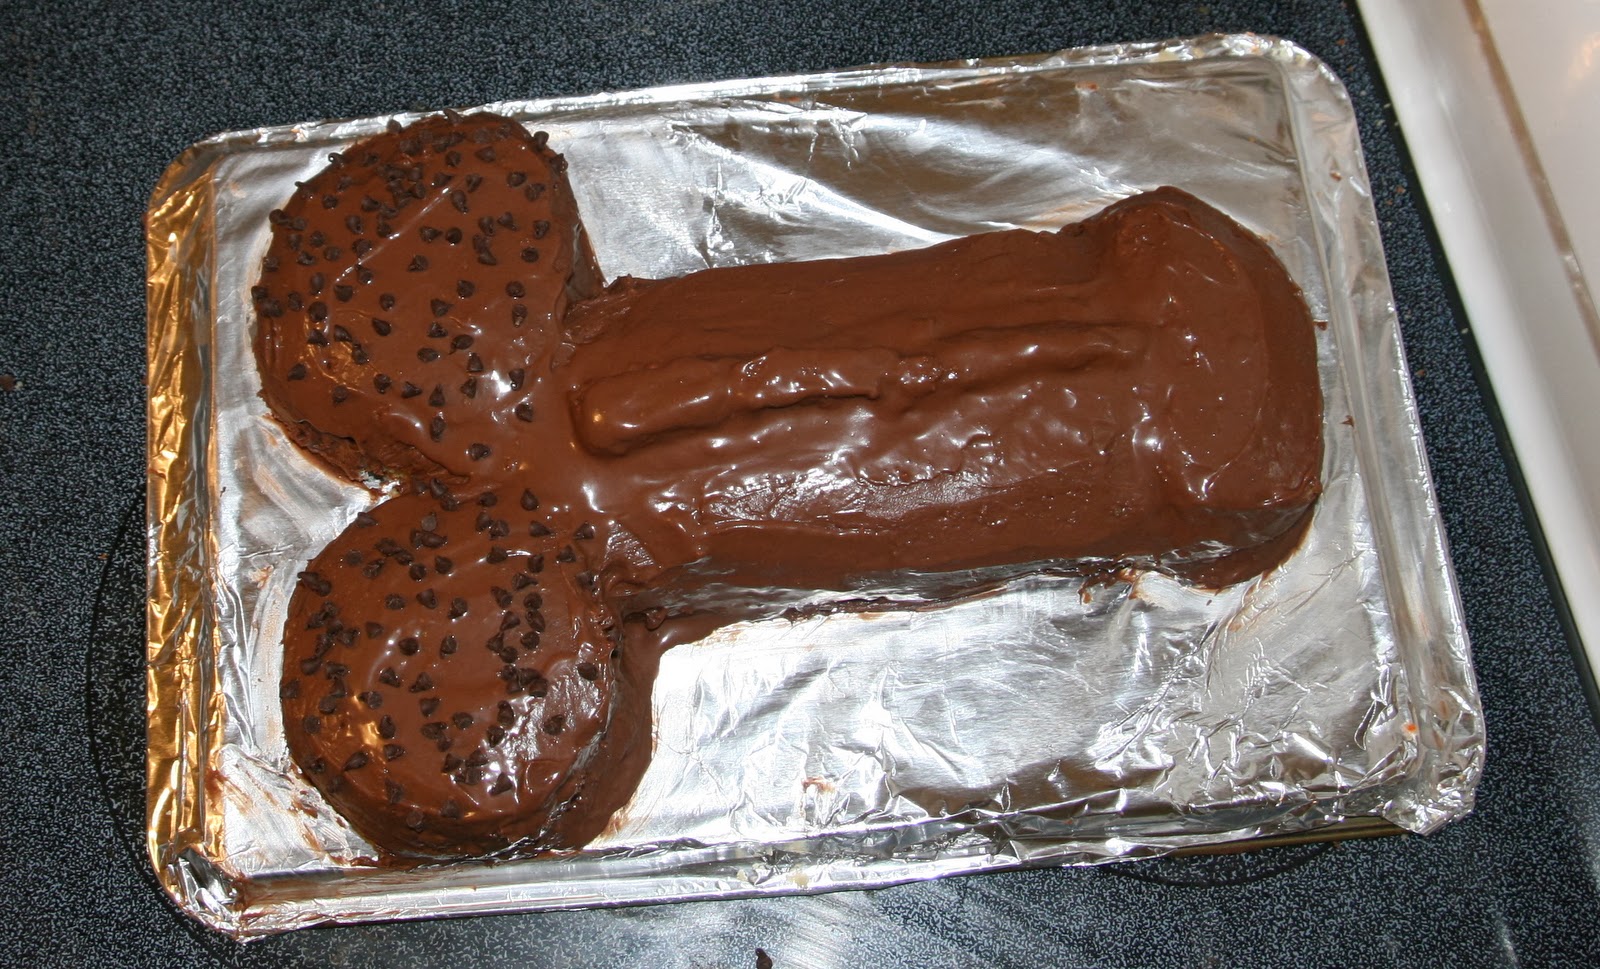 How To Make A Penis Cake (And Live To Tell About It) .